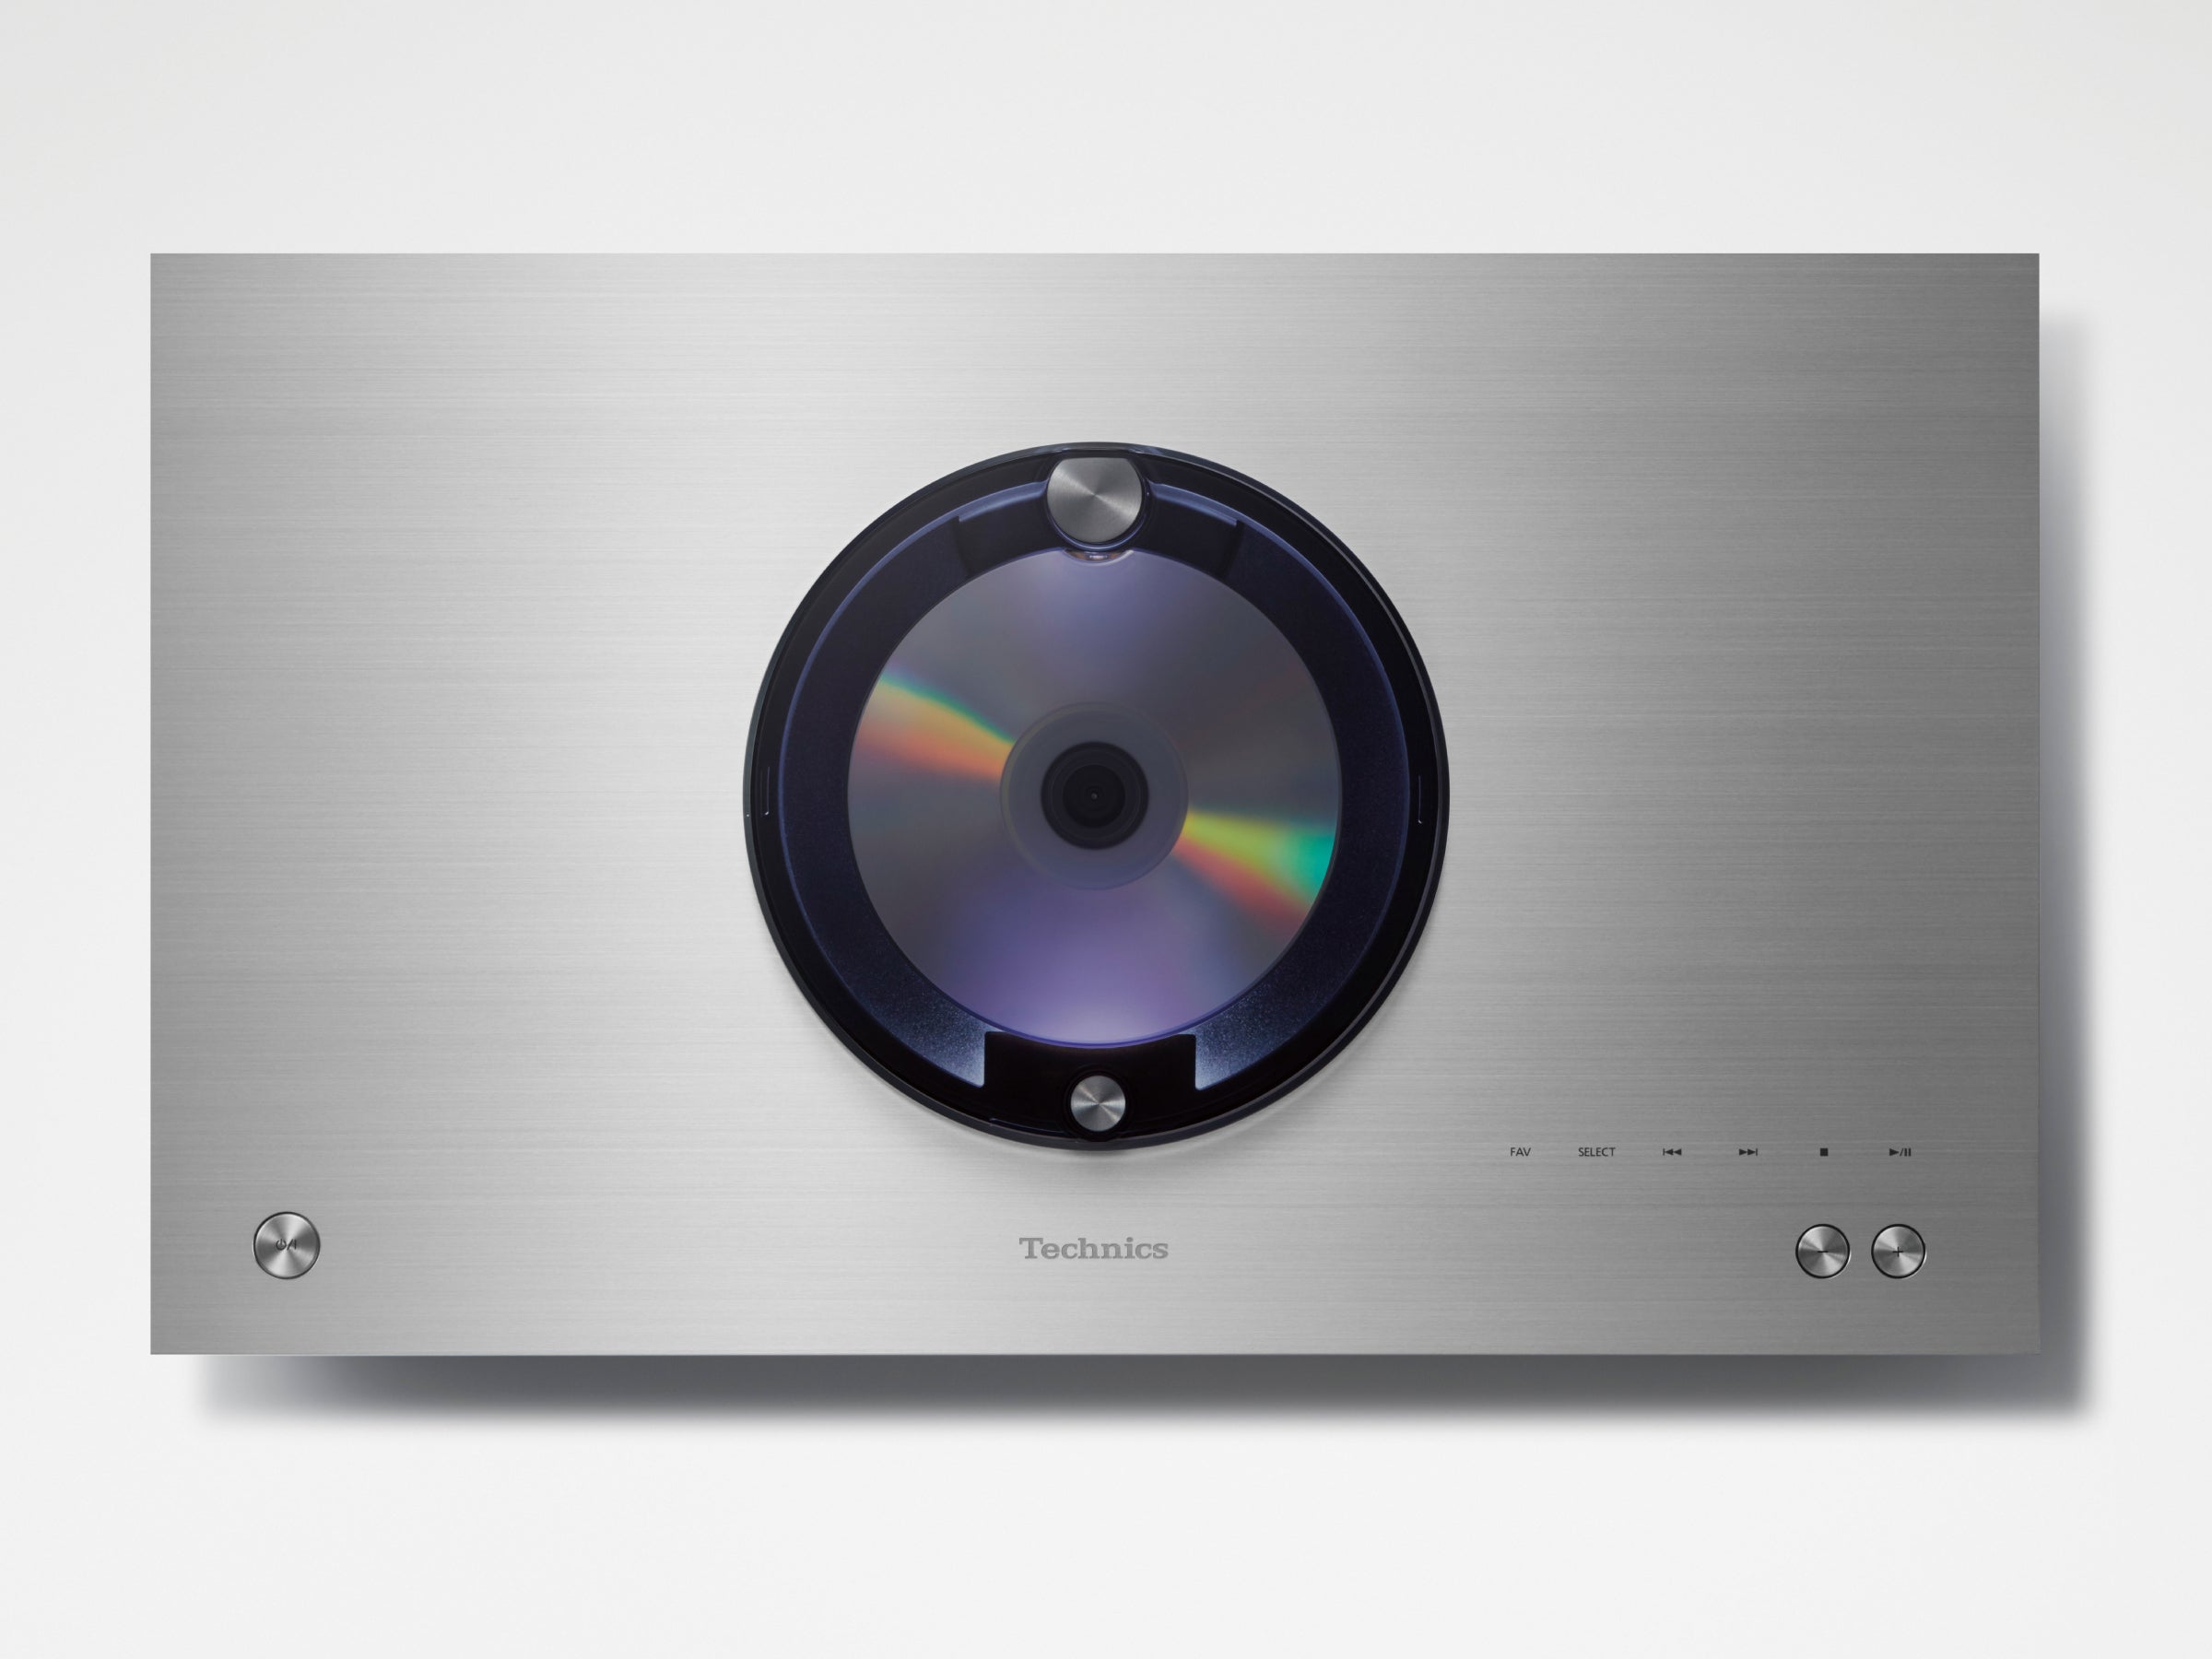 Technics SC-C70 MK2 All-in-One System